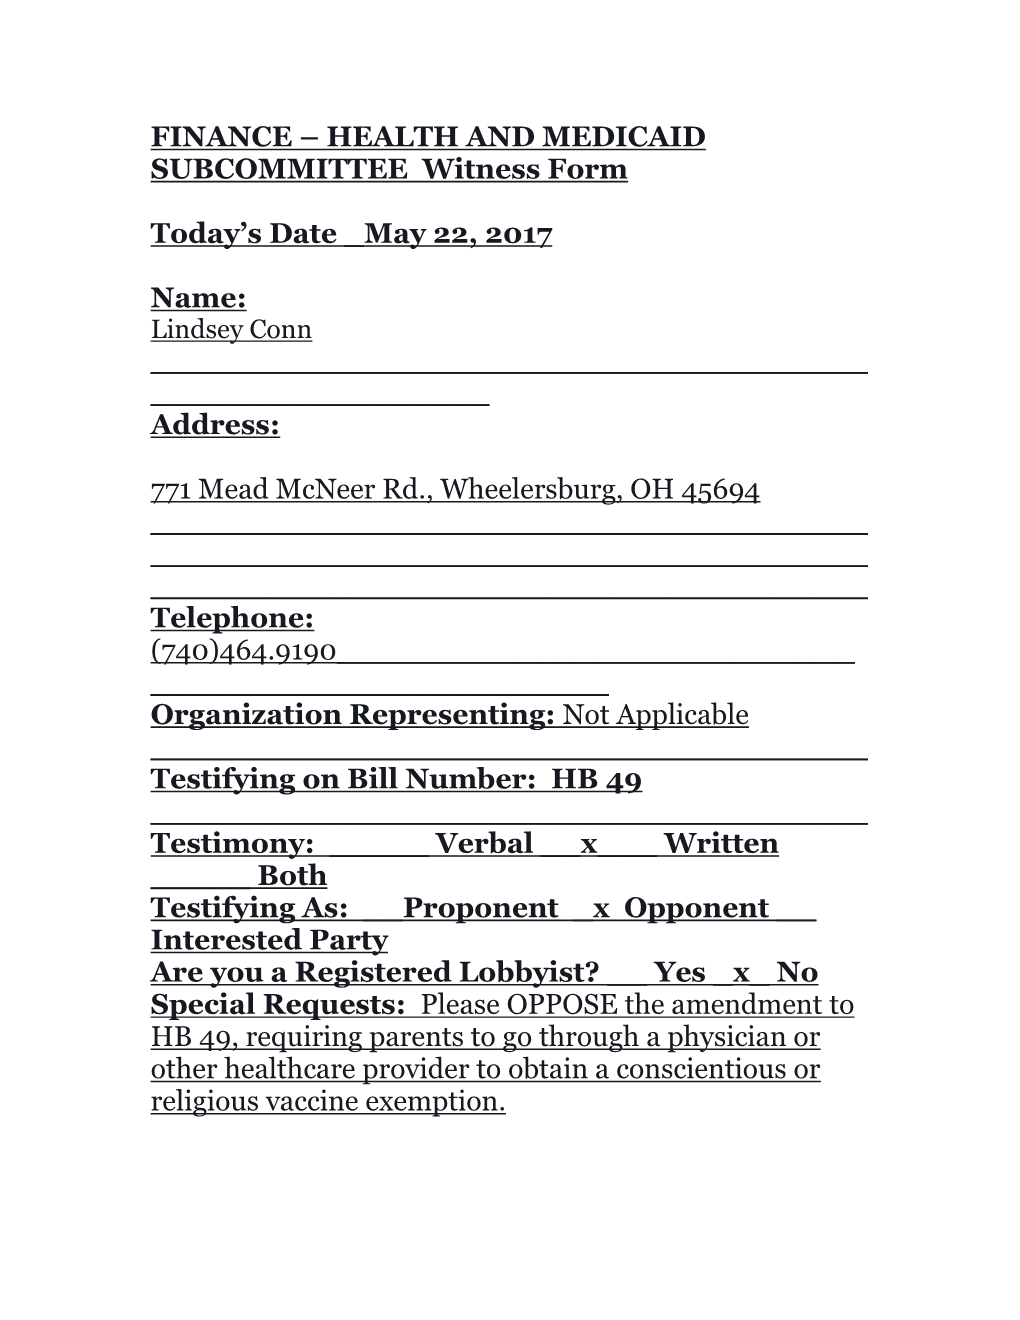 FINANCE – HEALTH and MEDICAID SUBCOMMITTEE Witness Form